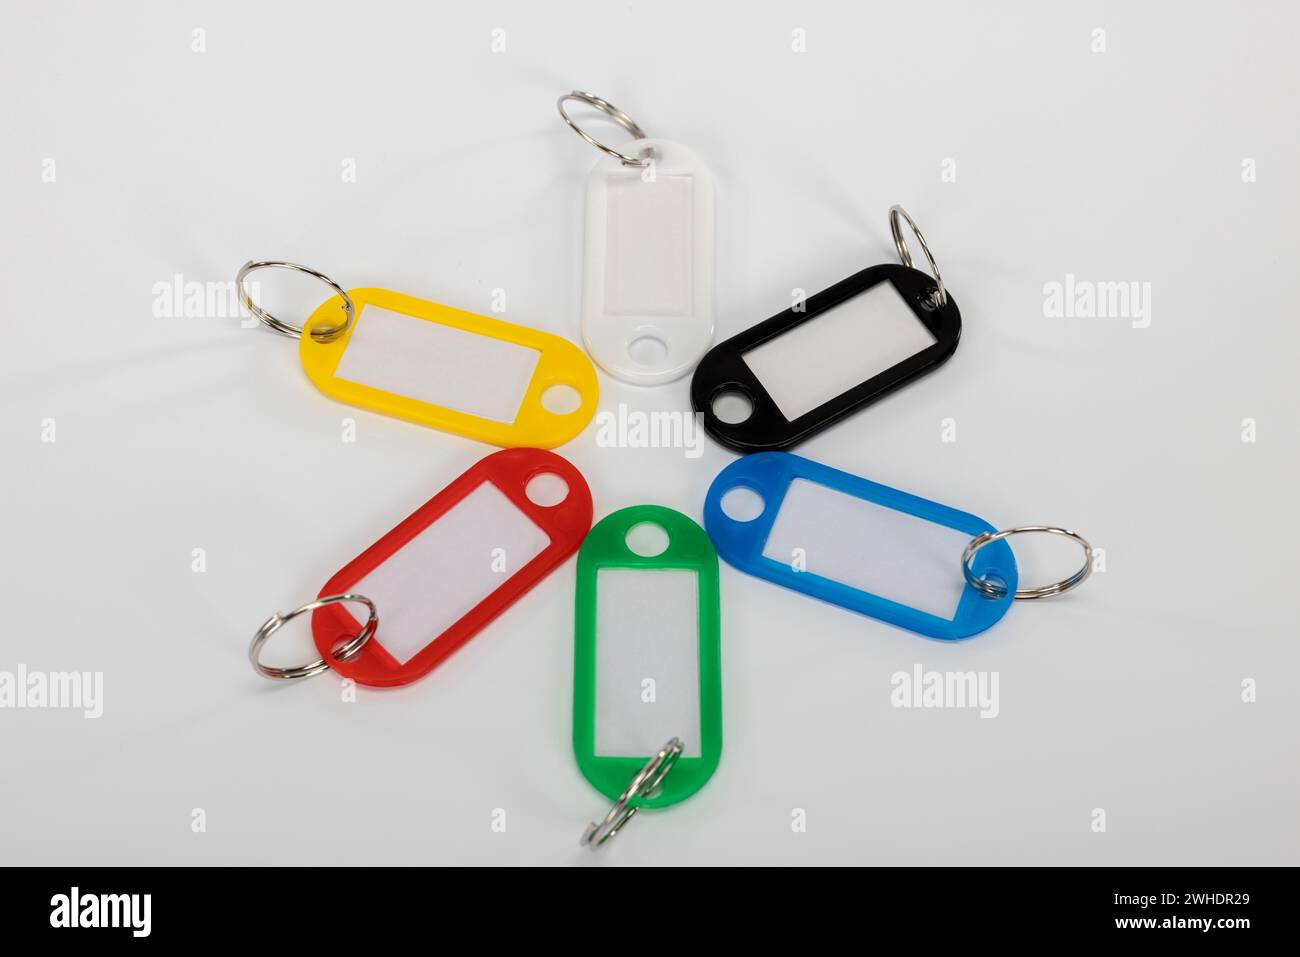 Six plastic key rings with ring, arranged, without lettering, different colors, white background, Stock Photo